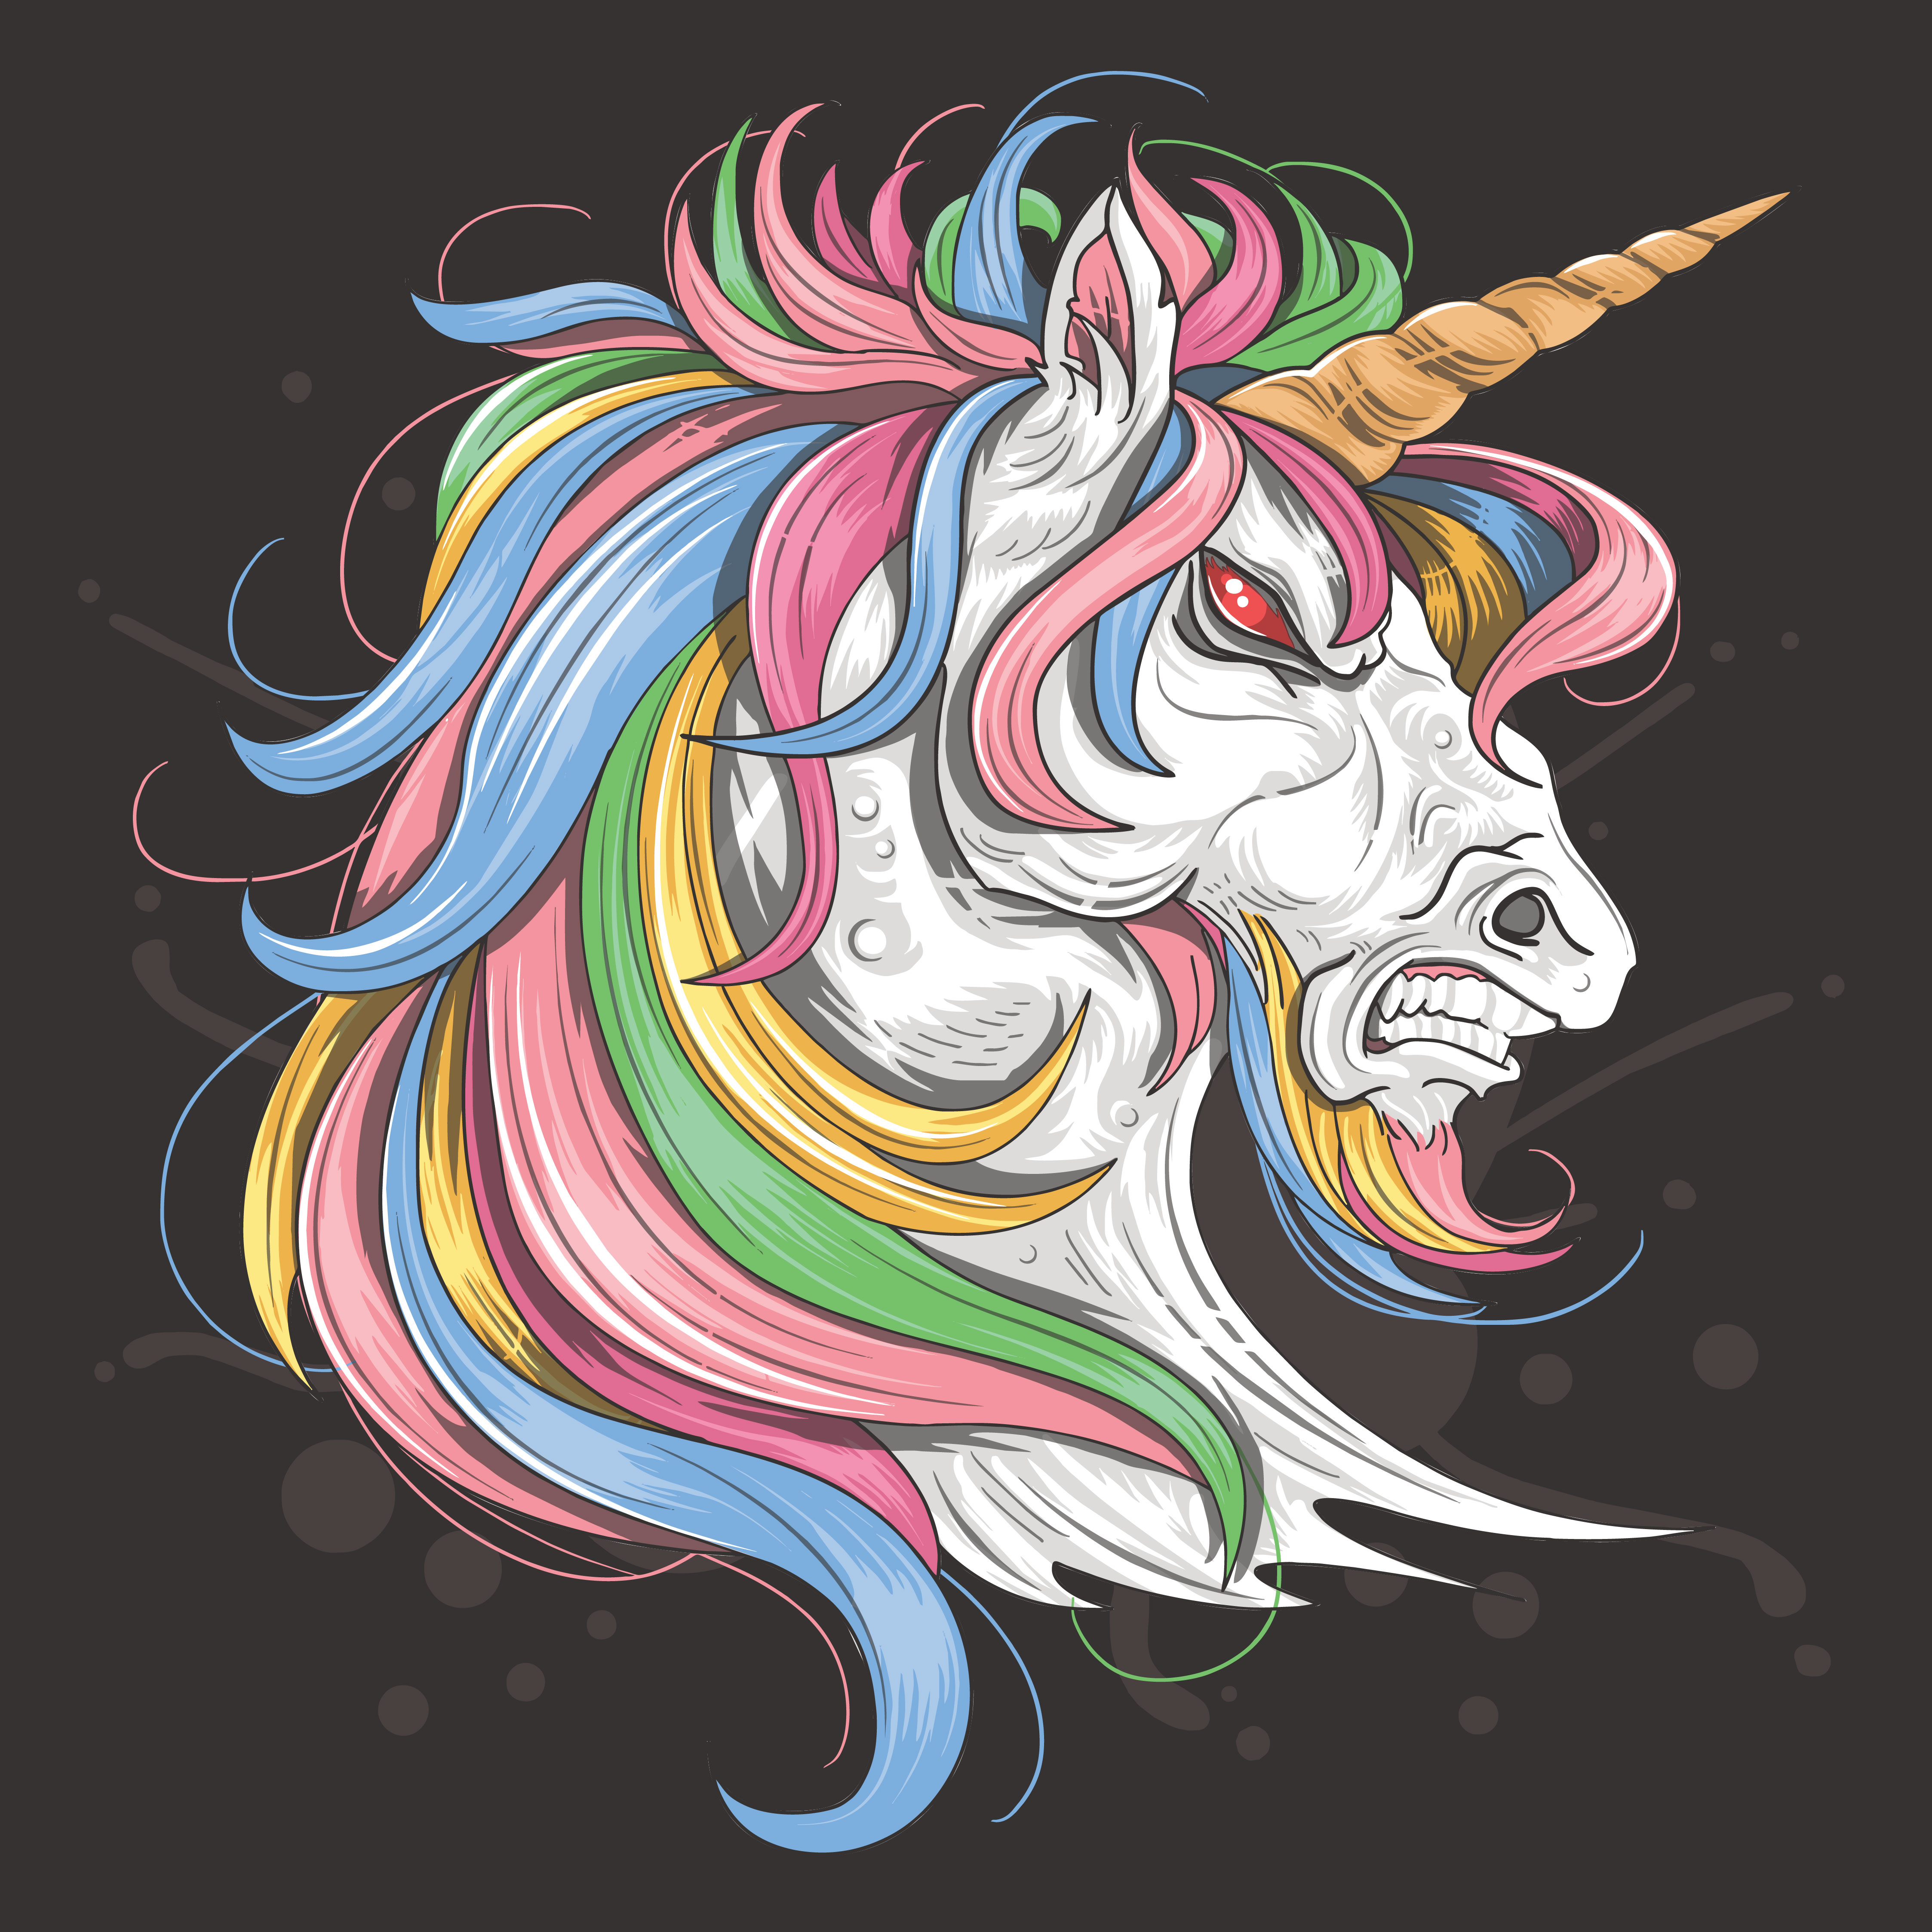 Browse 75 incredible Angry Unicorn vectors, icons, clipart graphics, and ba...